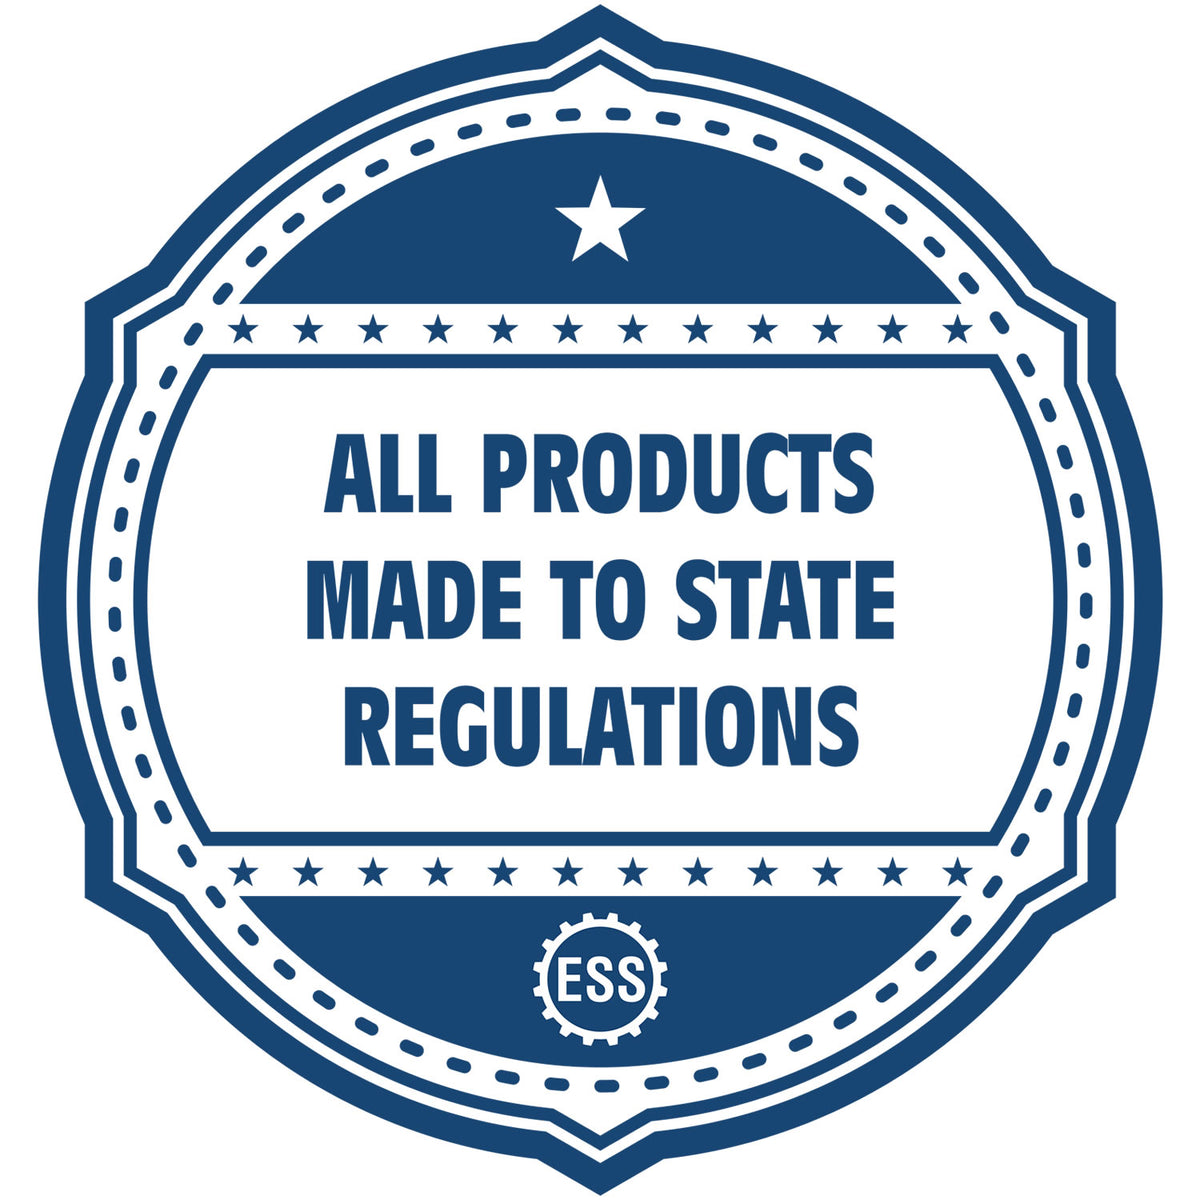 A blue icon or badge for the Hybrid Massachusetts Engineer Seal showing that this product is made in compliance with state regulations.